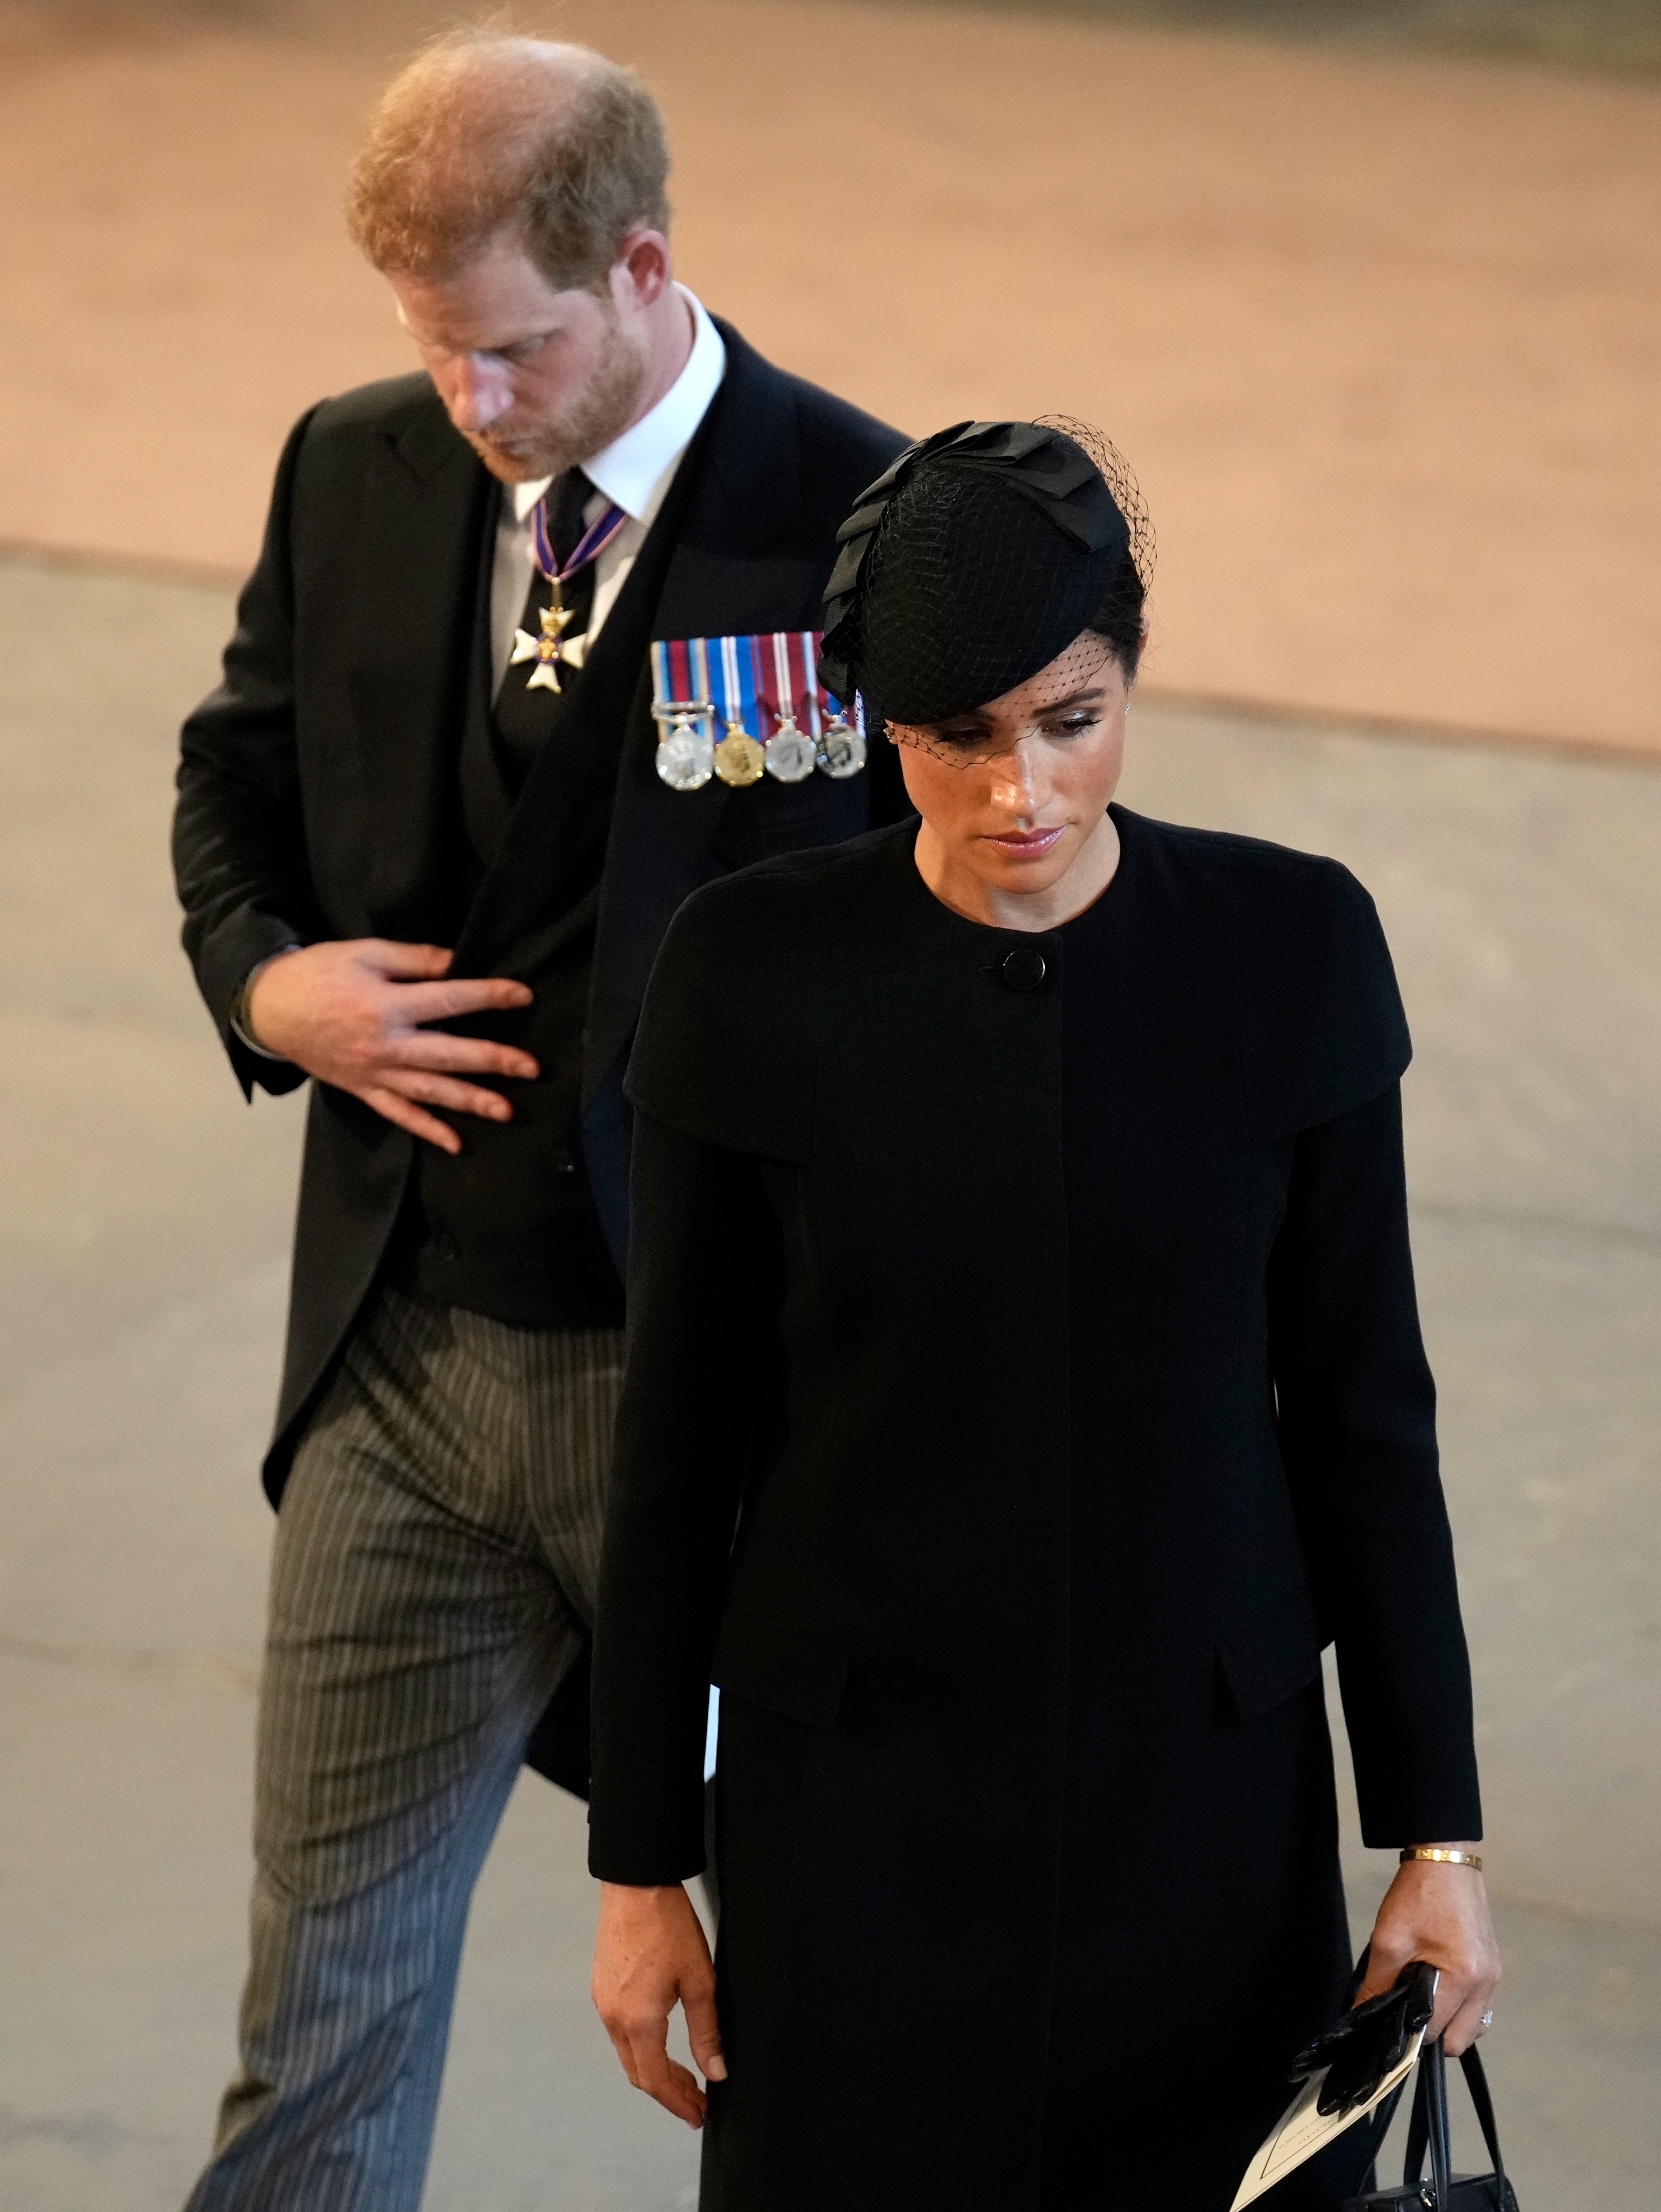 Prince Harry, Duke of Sussex and Meghan, Duchess of Sussex pay their respects at The Palace of Westminster during the procession for the Lying-in State of Queen Elizabeth II on September 14, 2022 in London, England | Source: Getty Images 